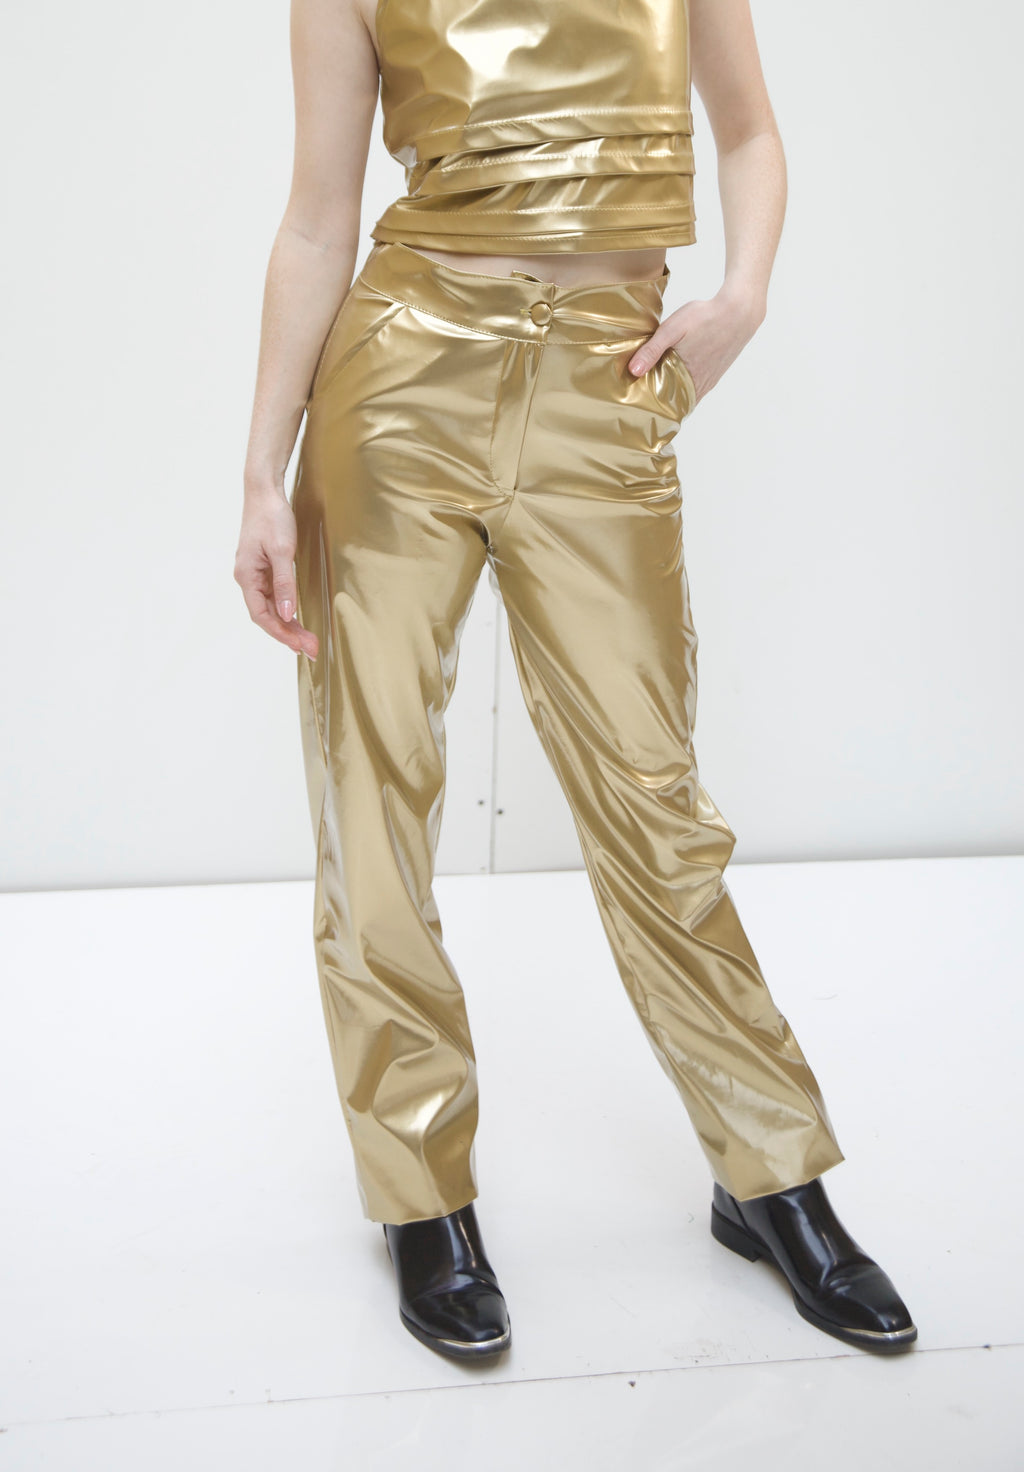 Disco pants in gold